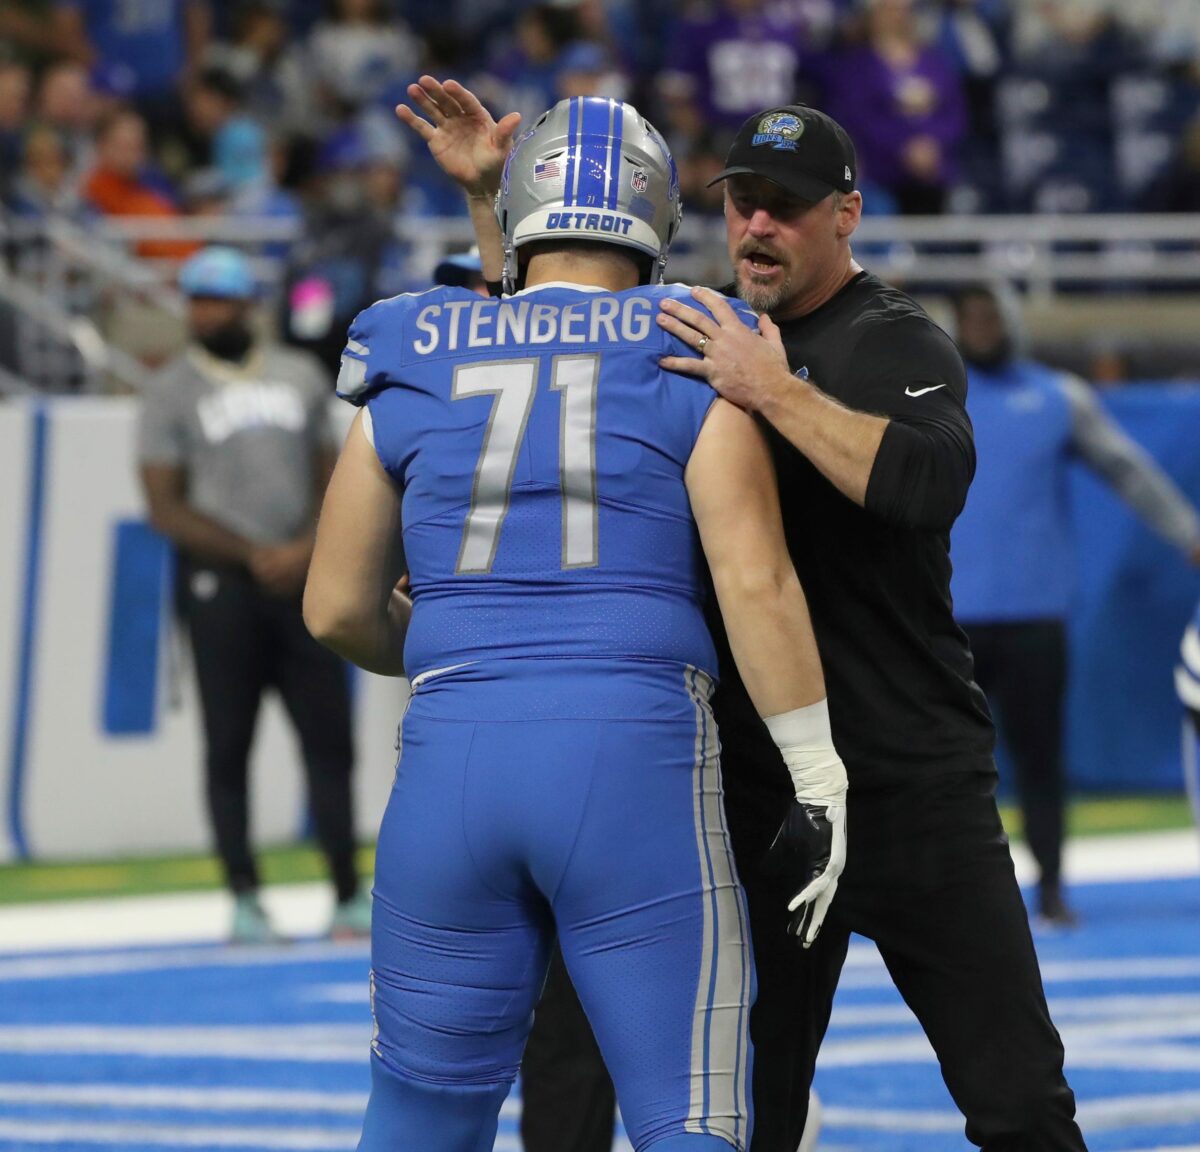 Report: The Lions are waiving OL Logan Stenberg